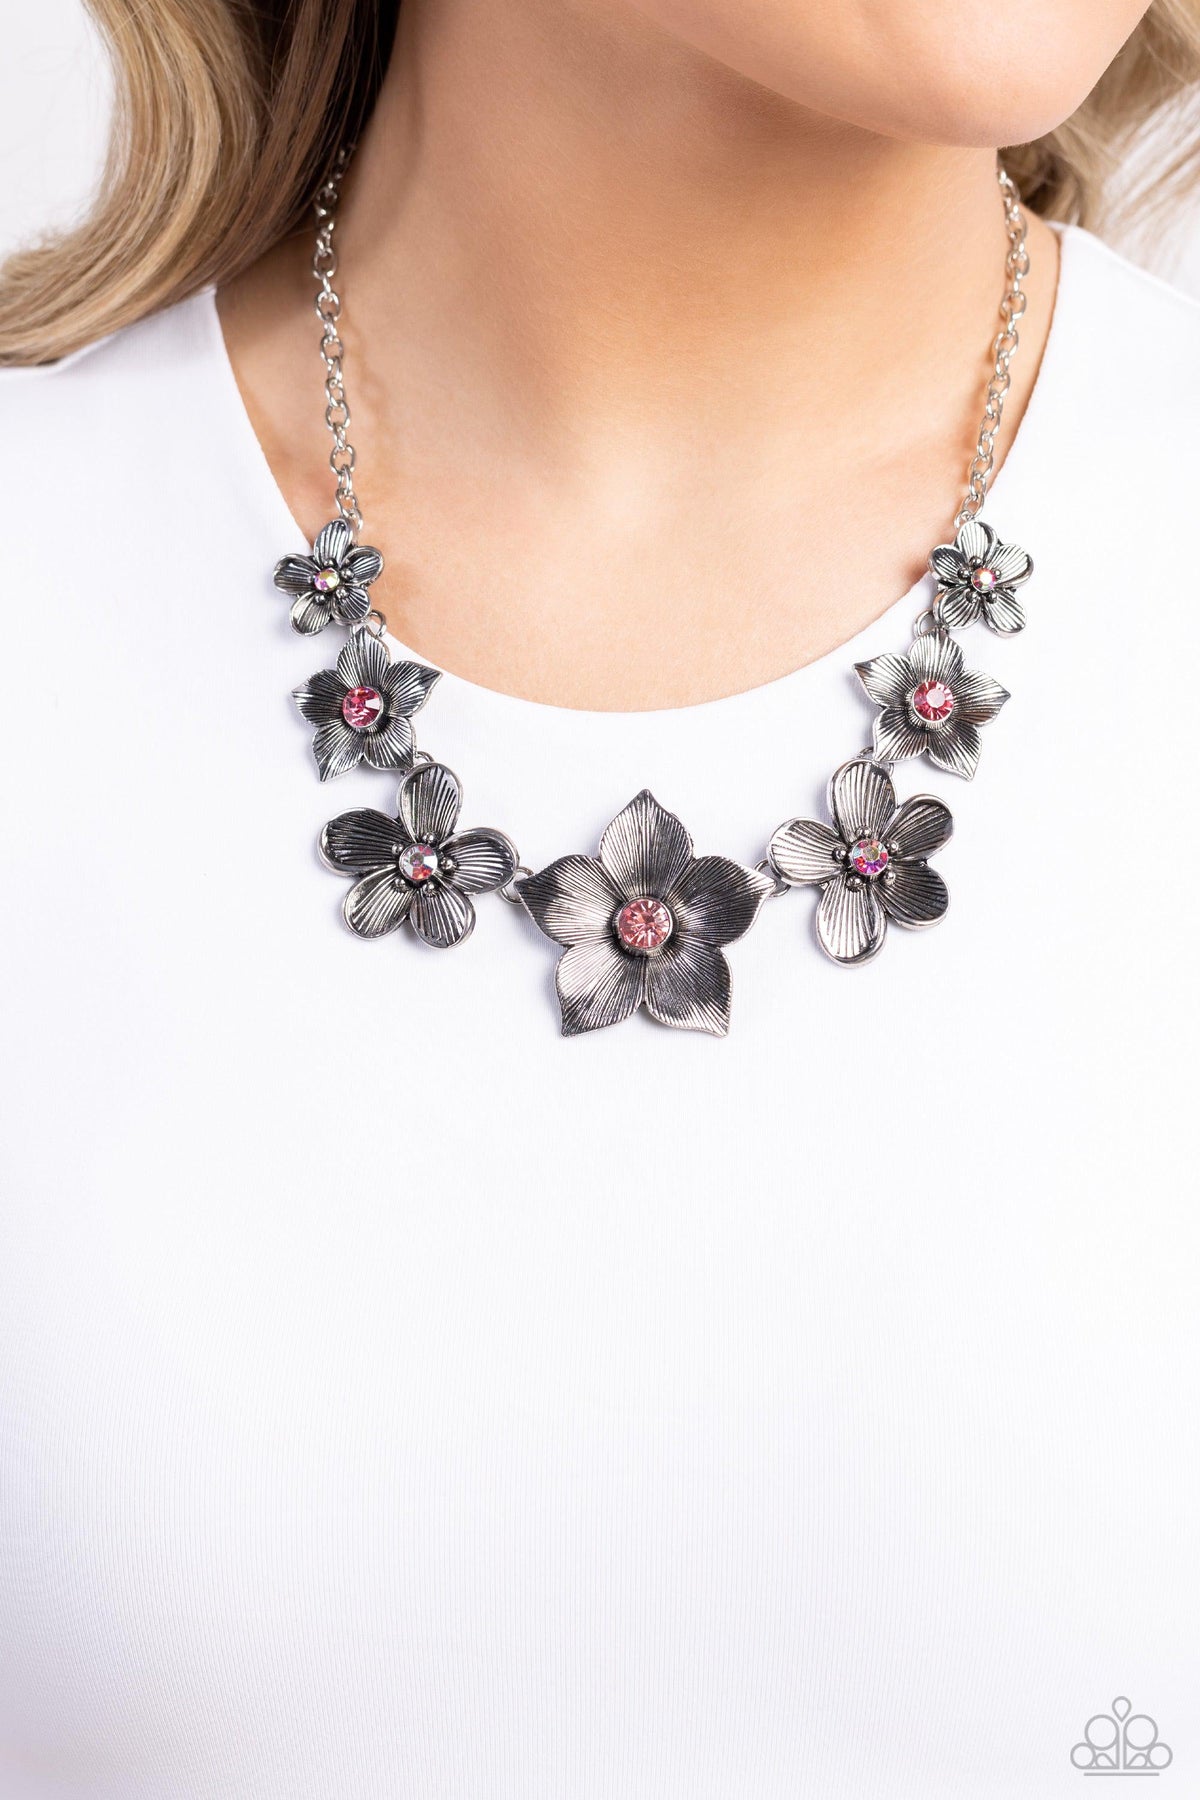 Free FLORAL Pink Necklace - Paparazzi Accessories-on model - CarasShop.com - $5 Jewelry by Cara Jewels